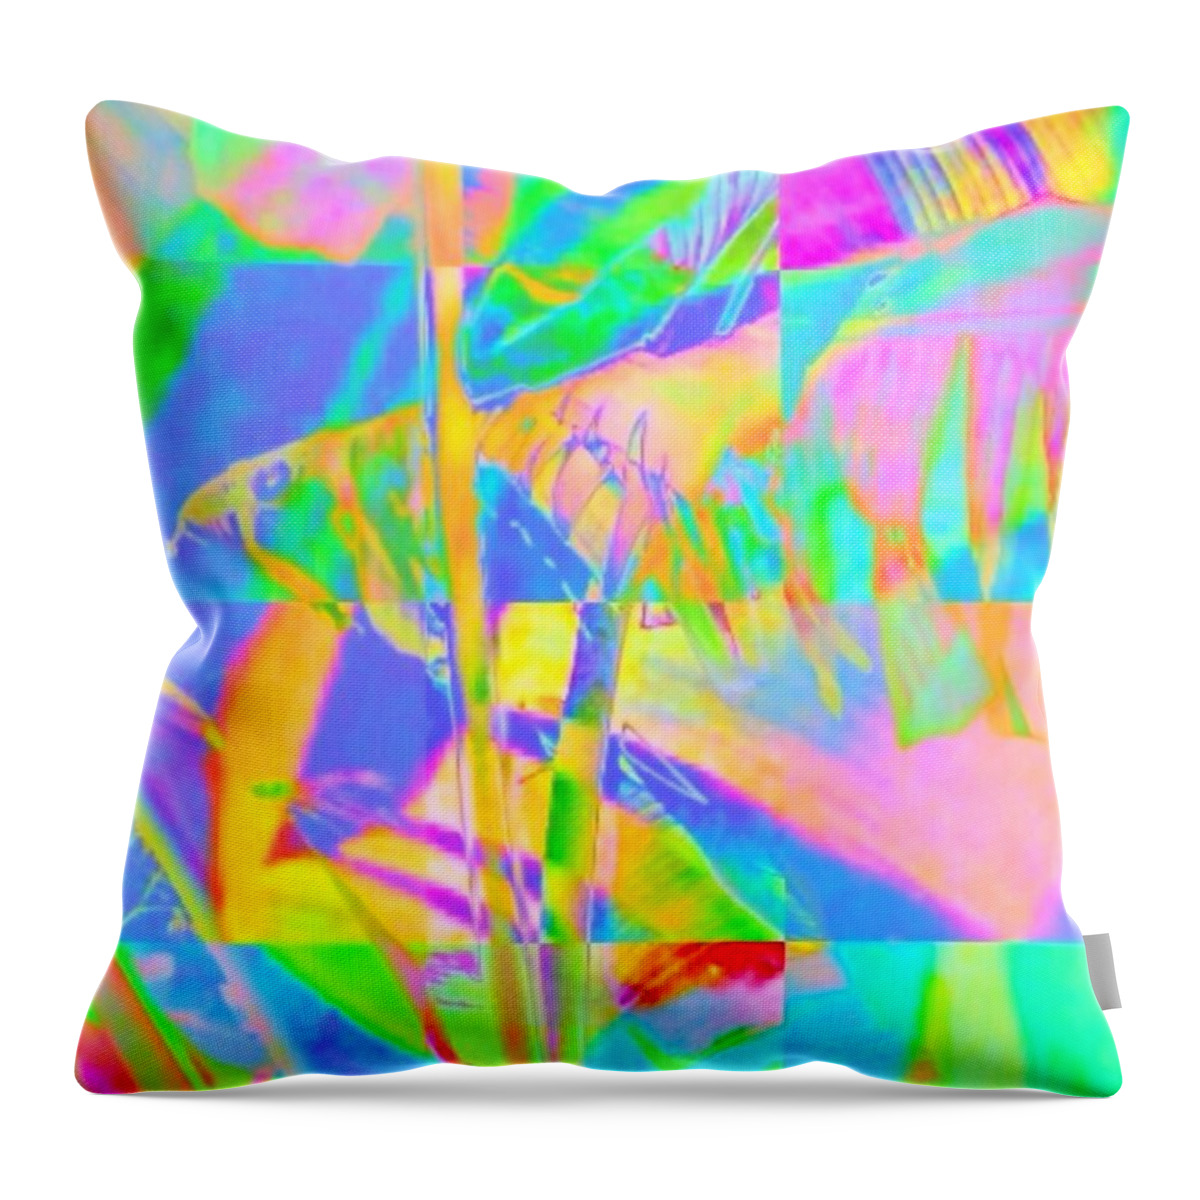 Sharkcrossing Throw Pillow featuring the digital art V Bright Abstracted Banana Leaf - Vertical by Lyn Voytershark